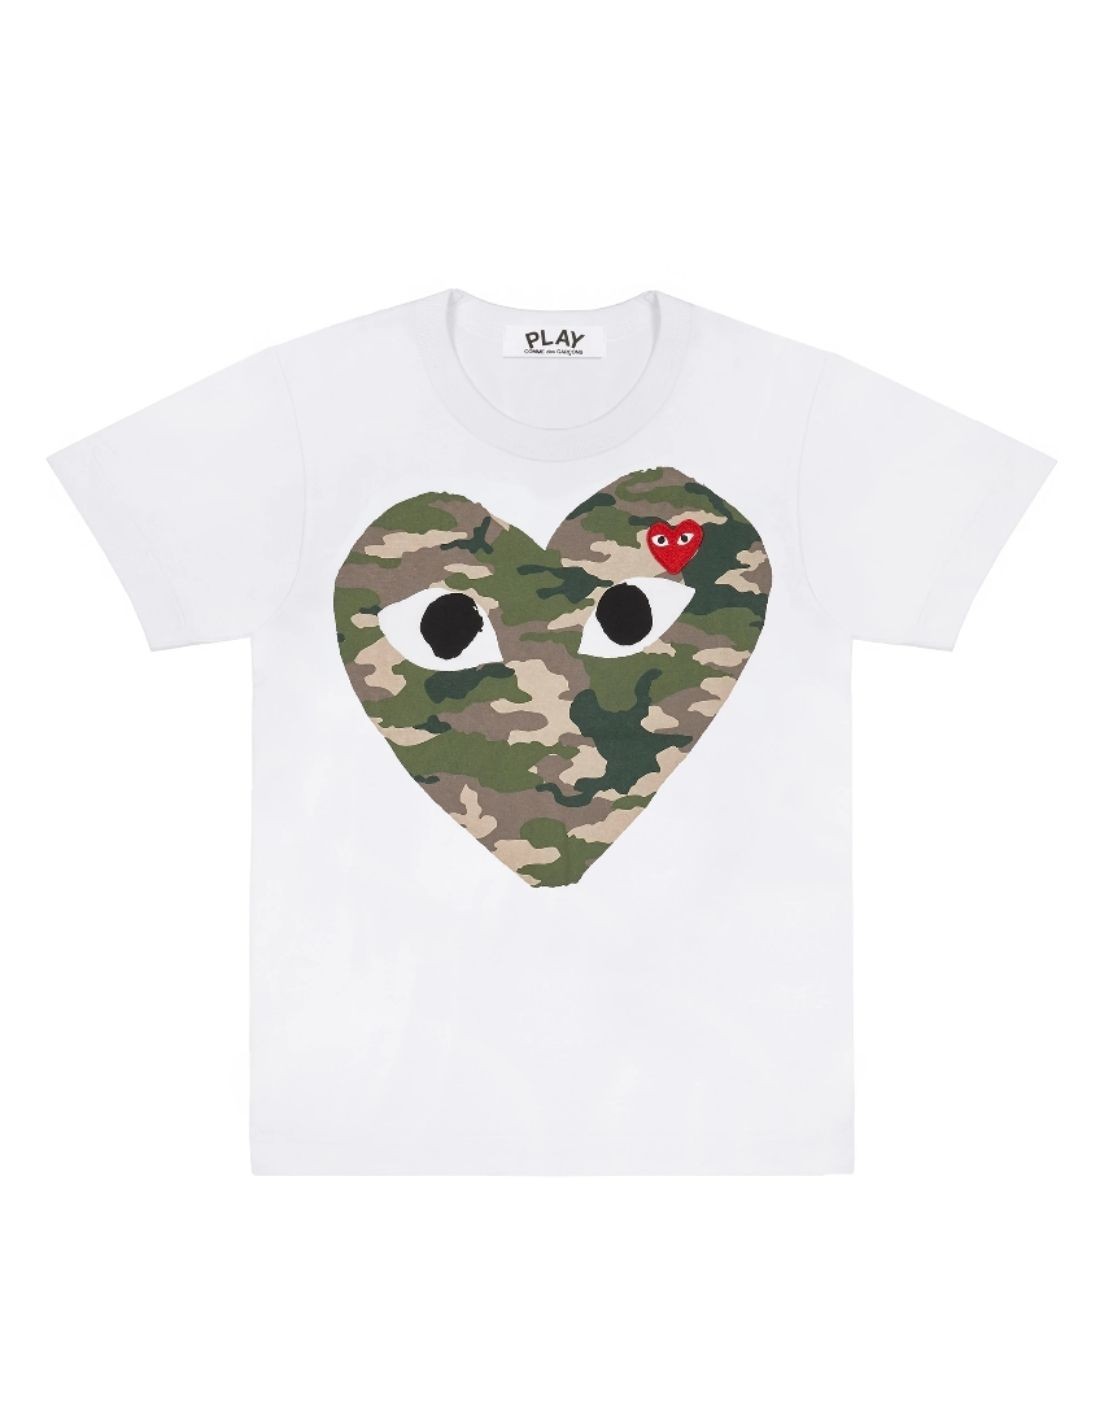 COMME DES GARCONS PLAY white tee with camouflage heart